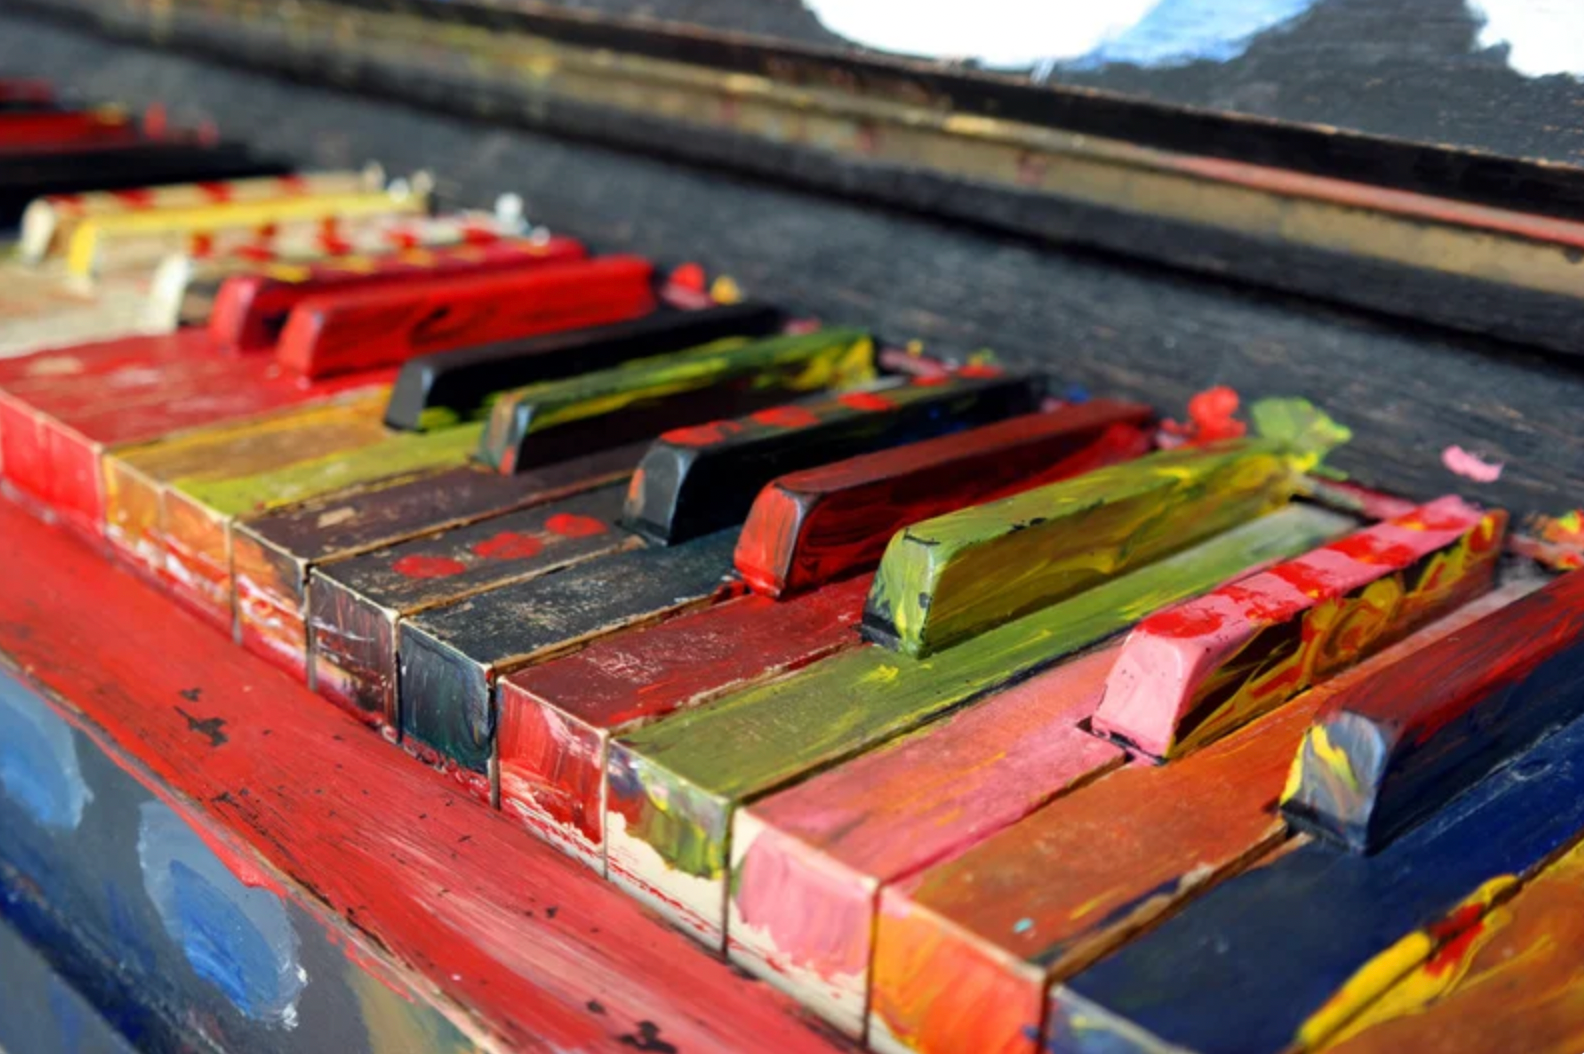 Piano keys each painted differently